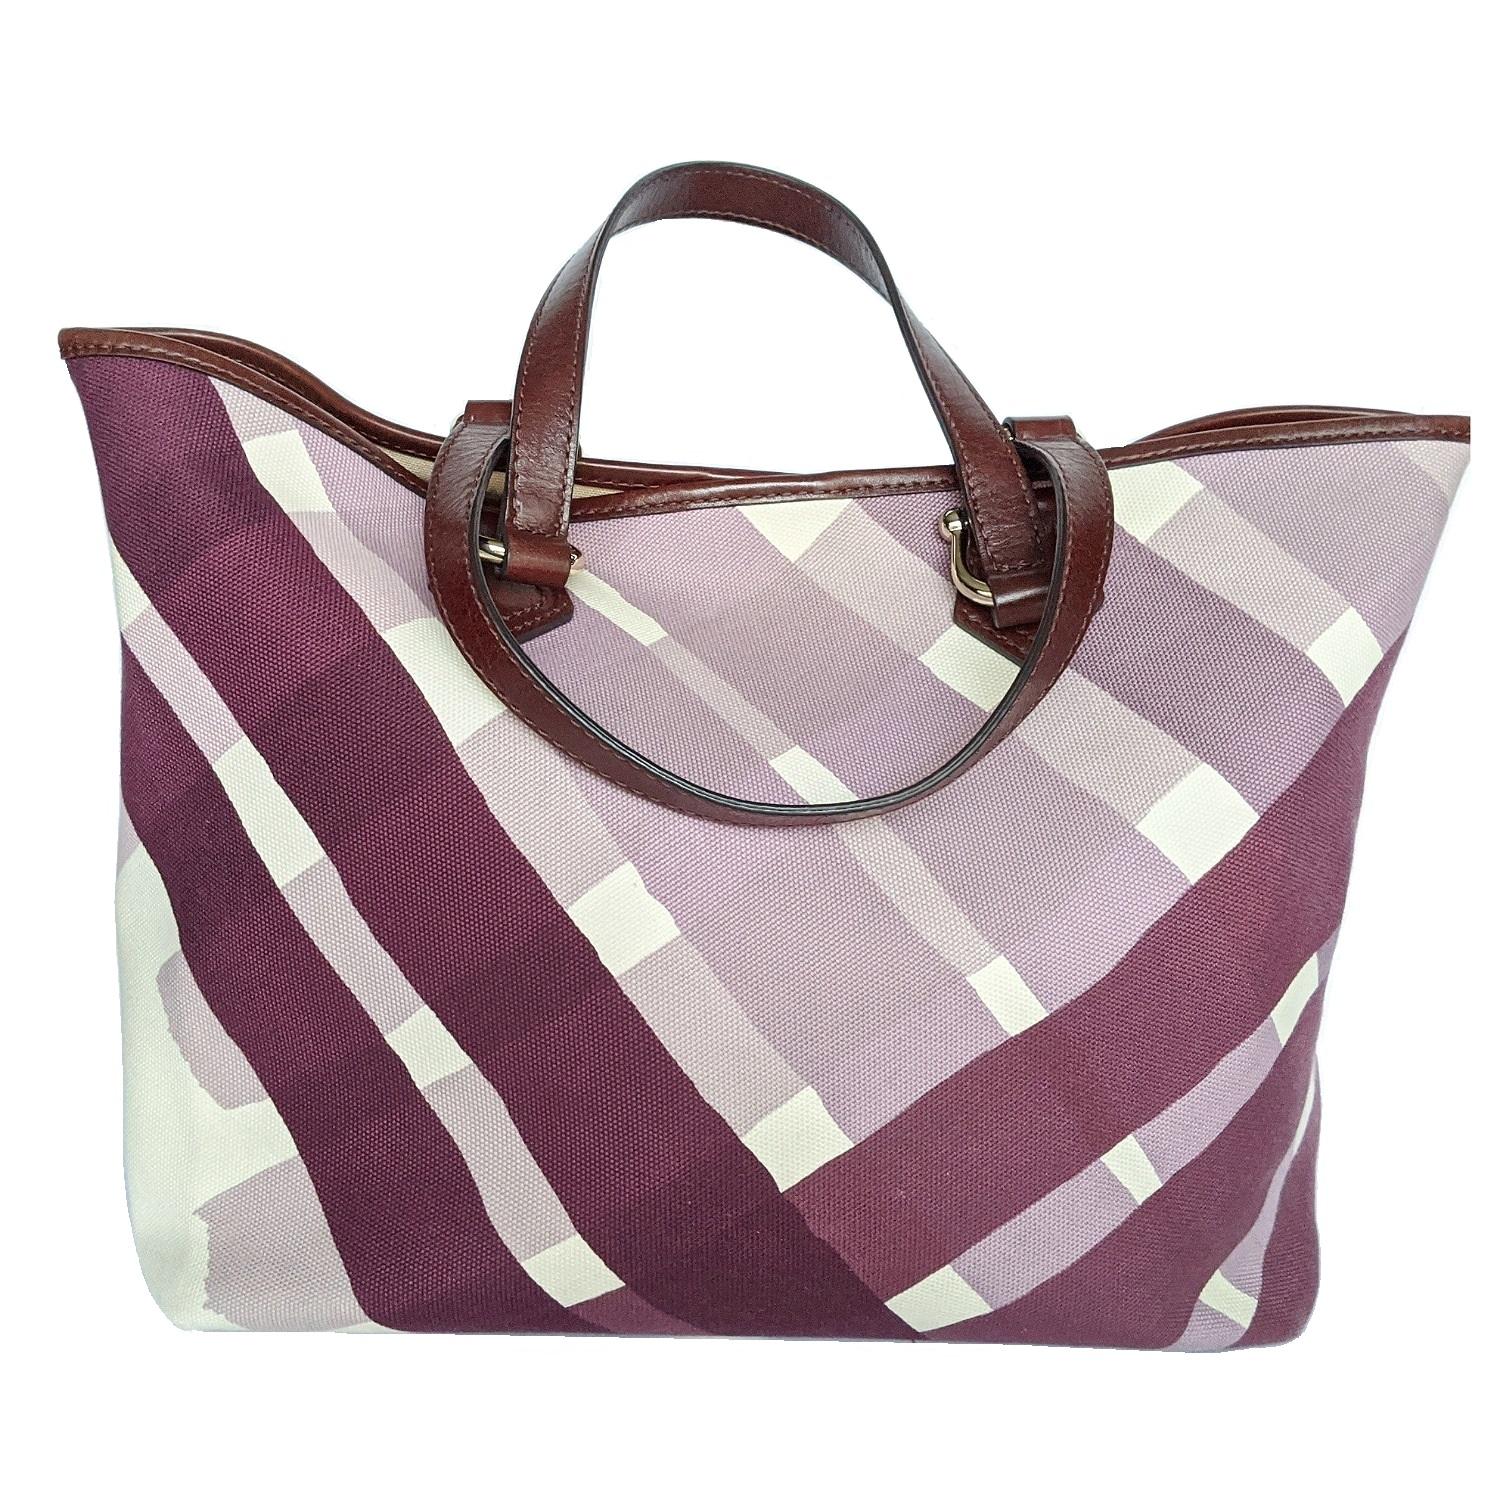 This is a lovely tote that is beautifully crafted of a checked canvas in graduating tones of purple. The bag features dark purple tall leather strap top handles with polished silver-tone hardware. Magnetic closure open to a spacious fabric interior